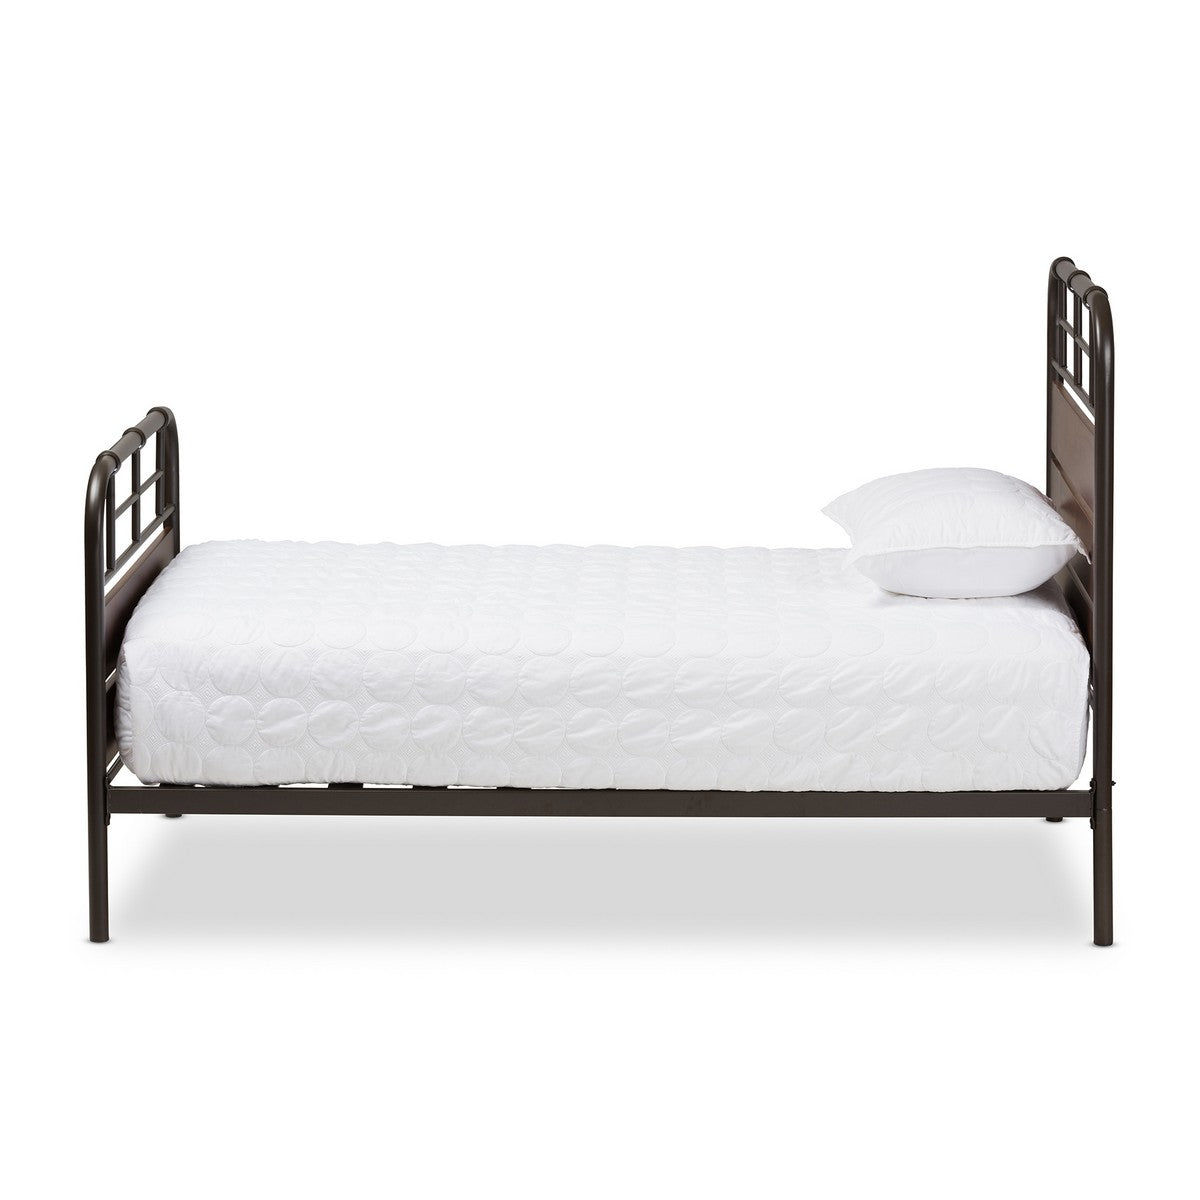 Baxton Studio Monoco Rustic Industrial Black Finished Metal Coco Brown Wood Twin Size Platform Bed